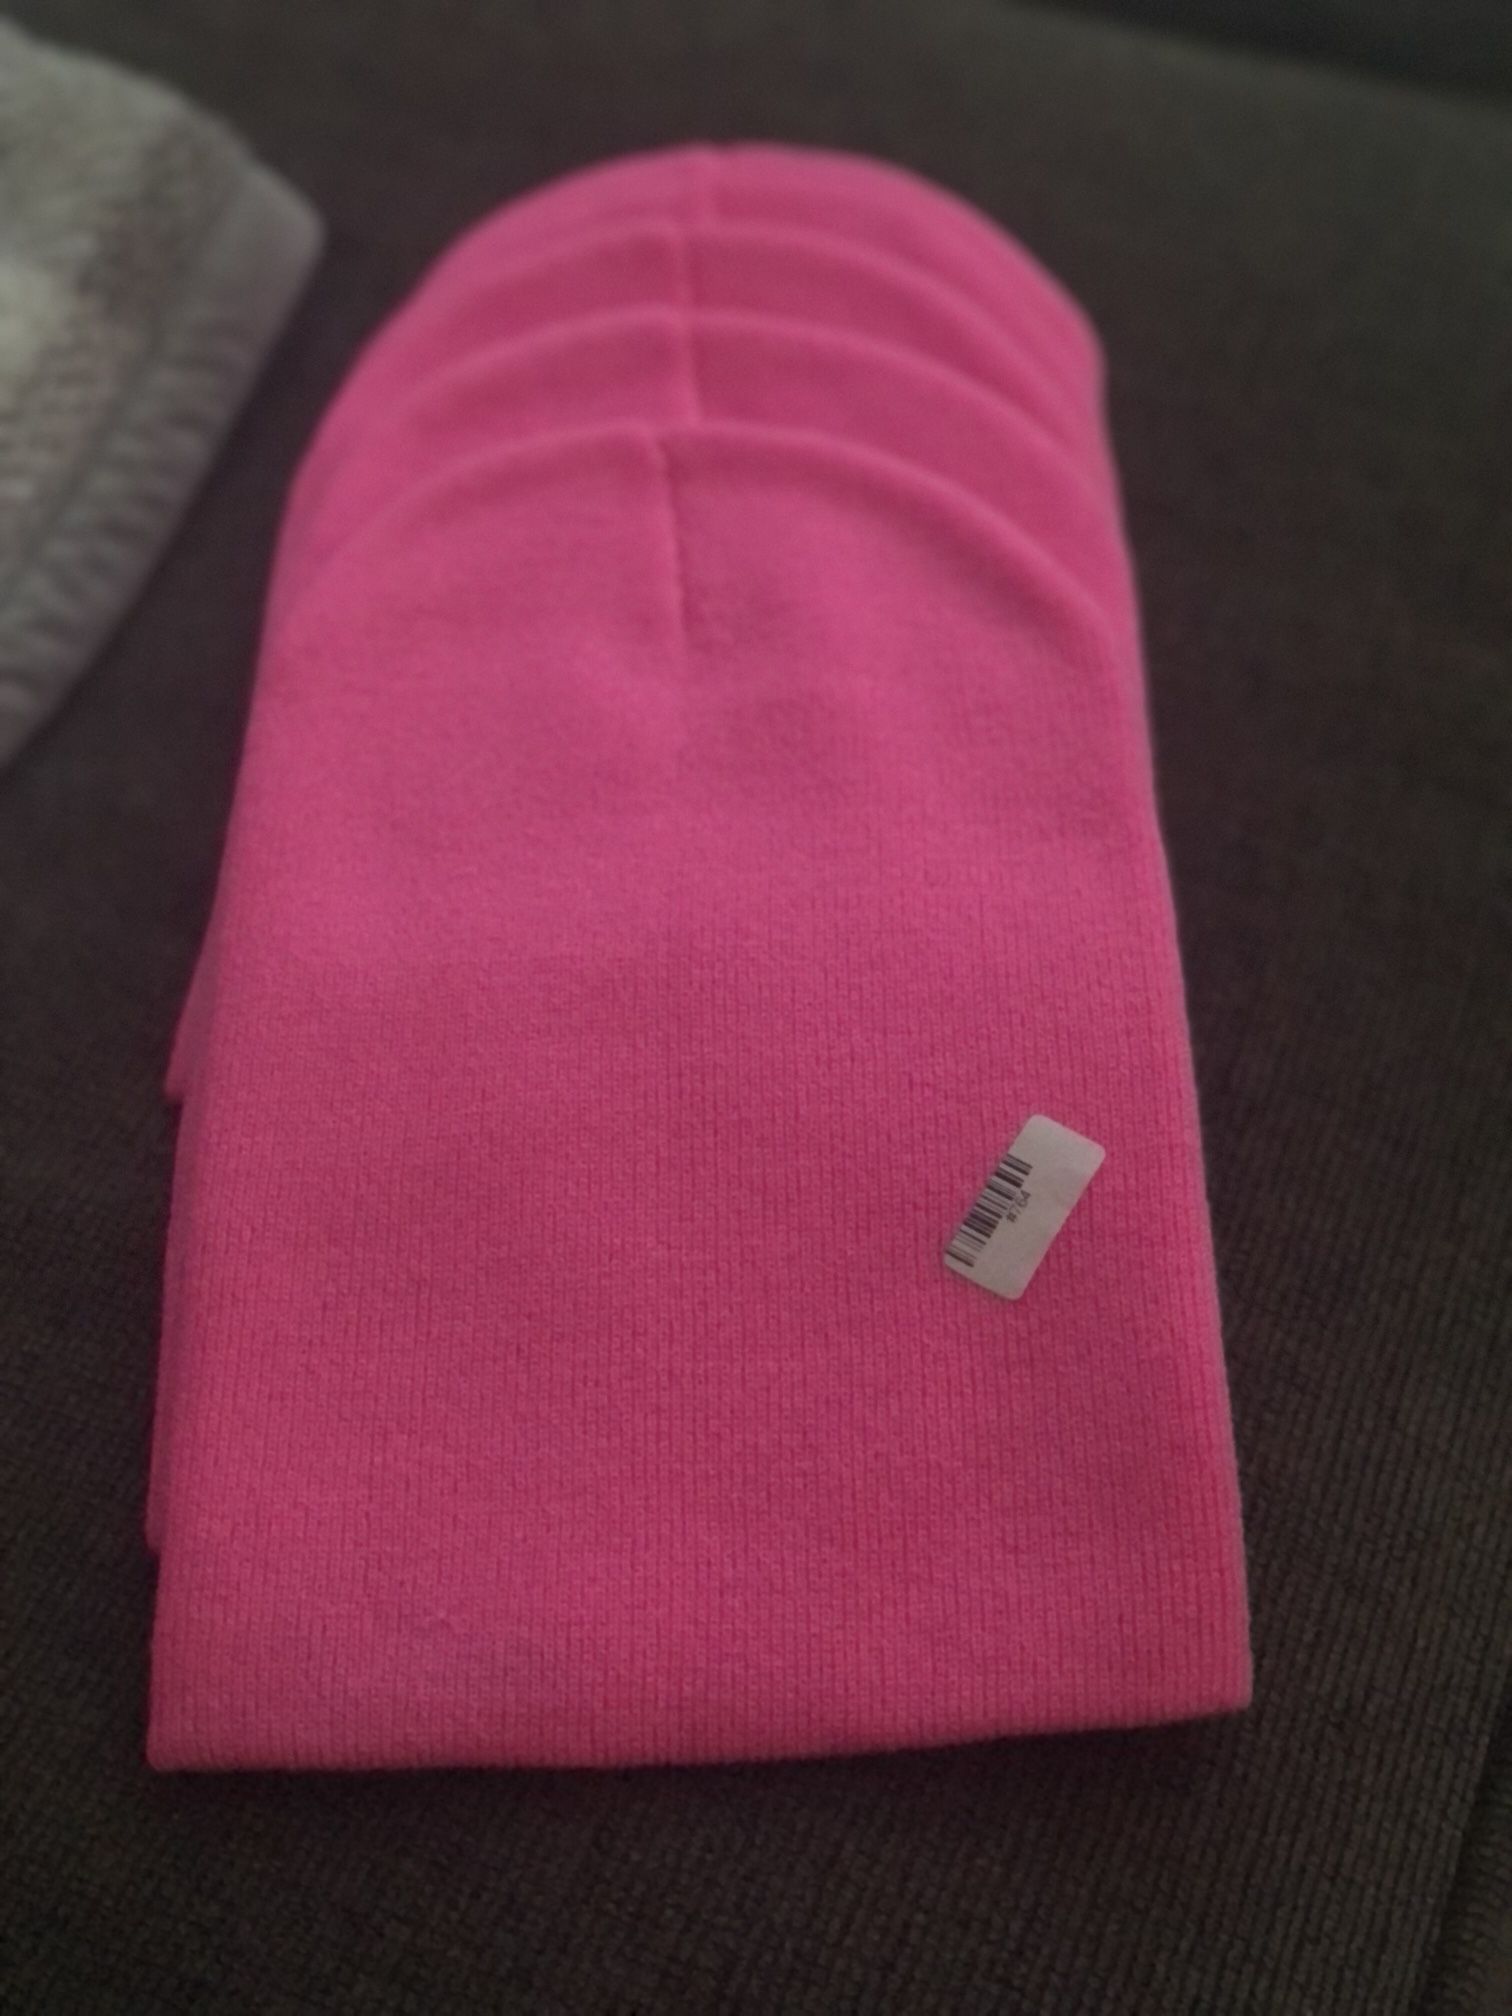 NEW Pink Knit Hats